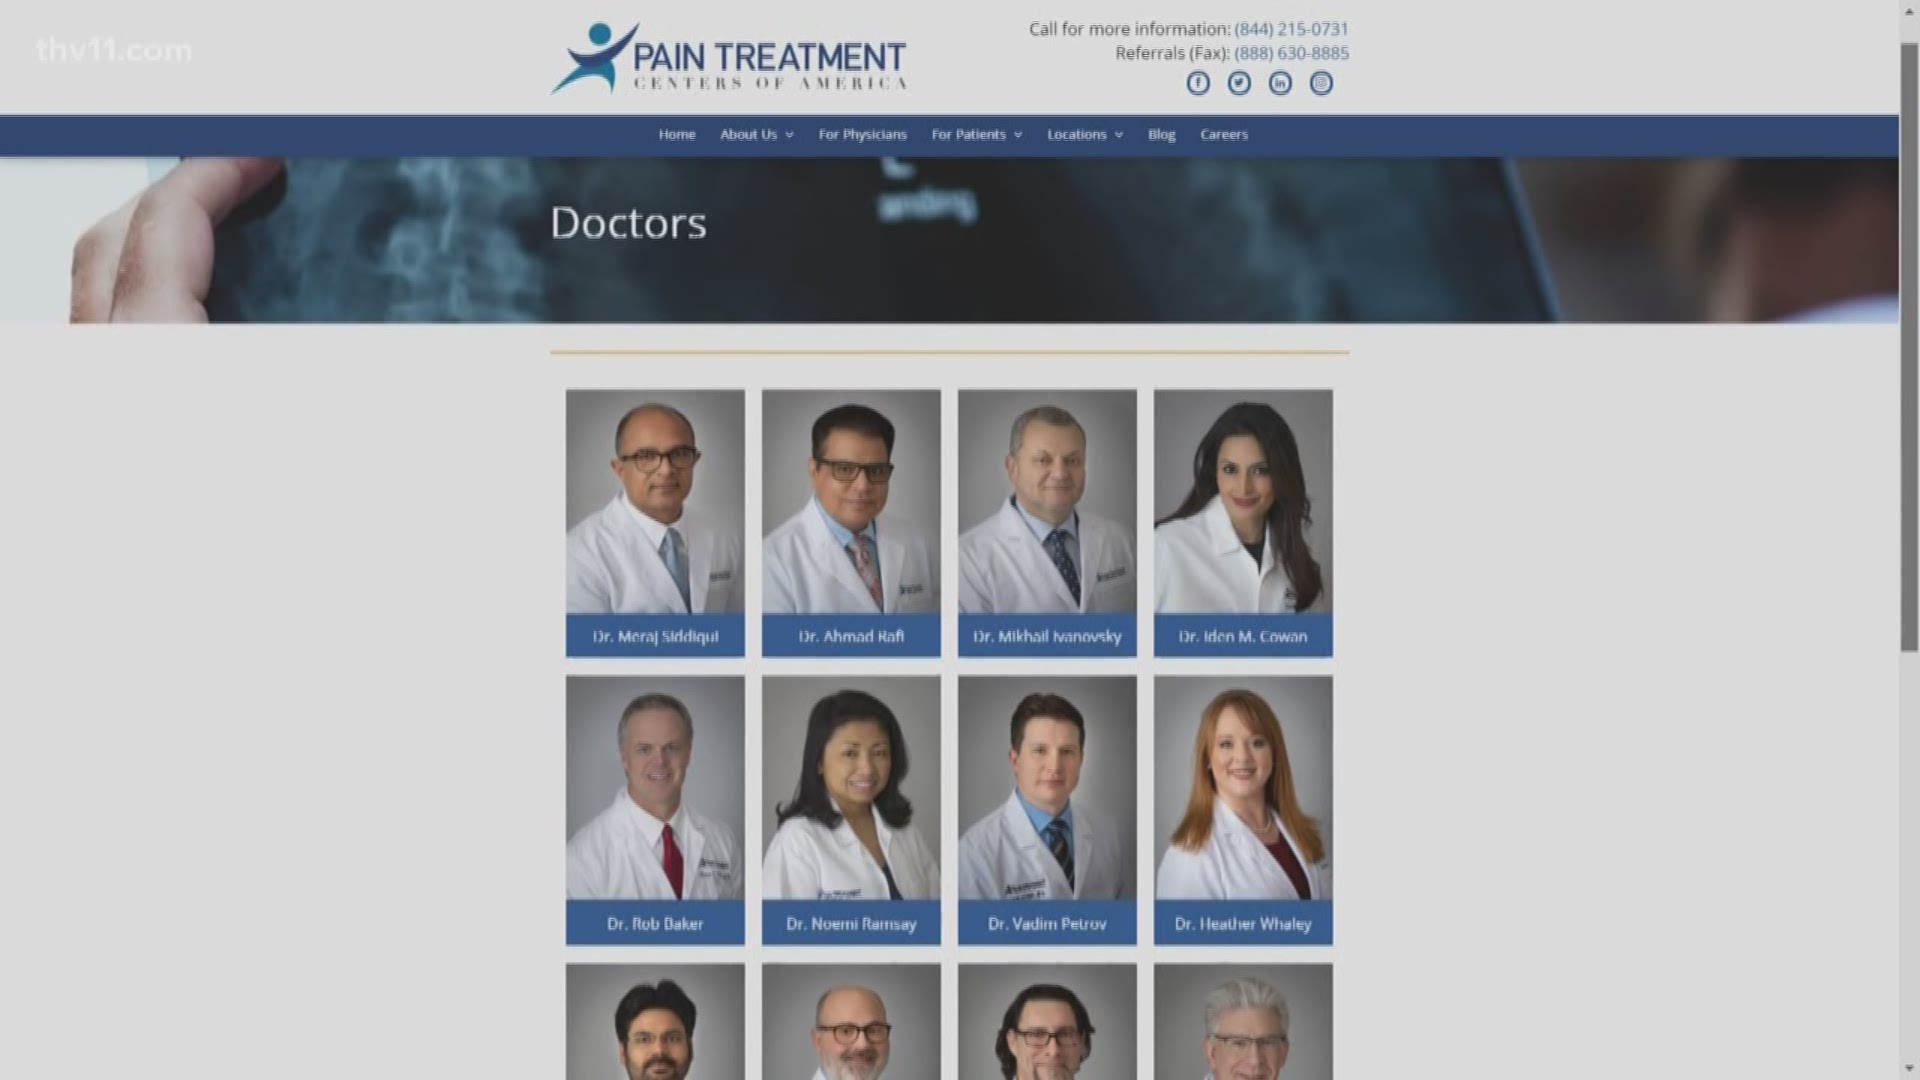 Learn more about the Pain Treatment Centers of America at PTCOA.COM.